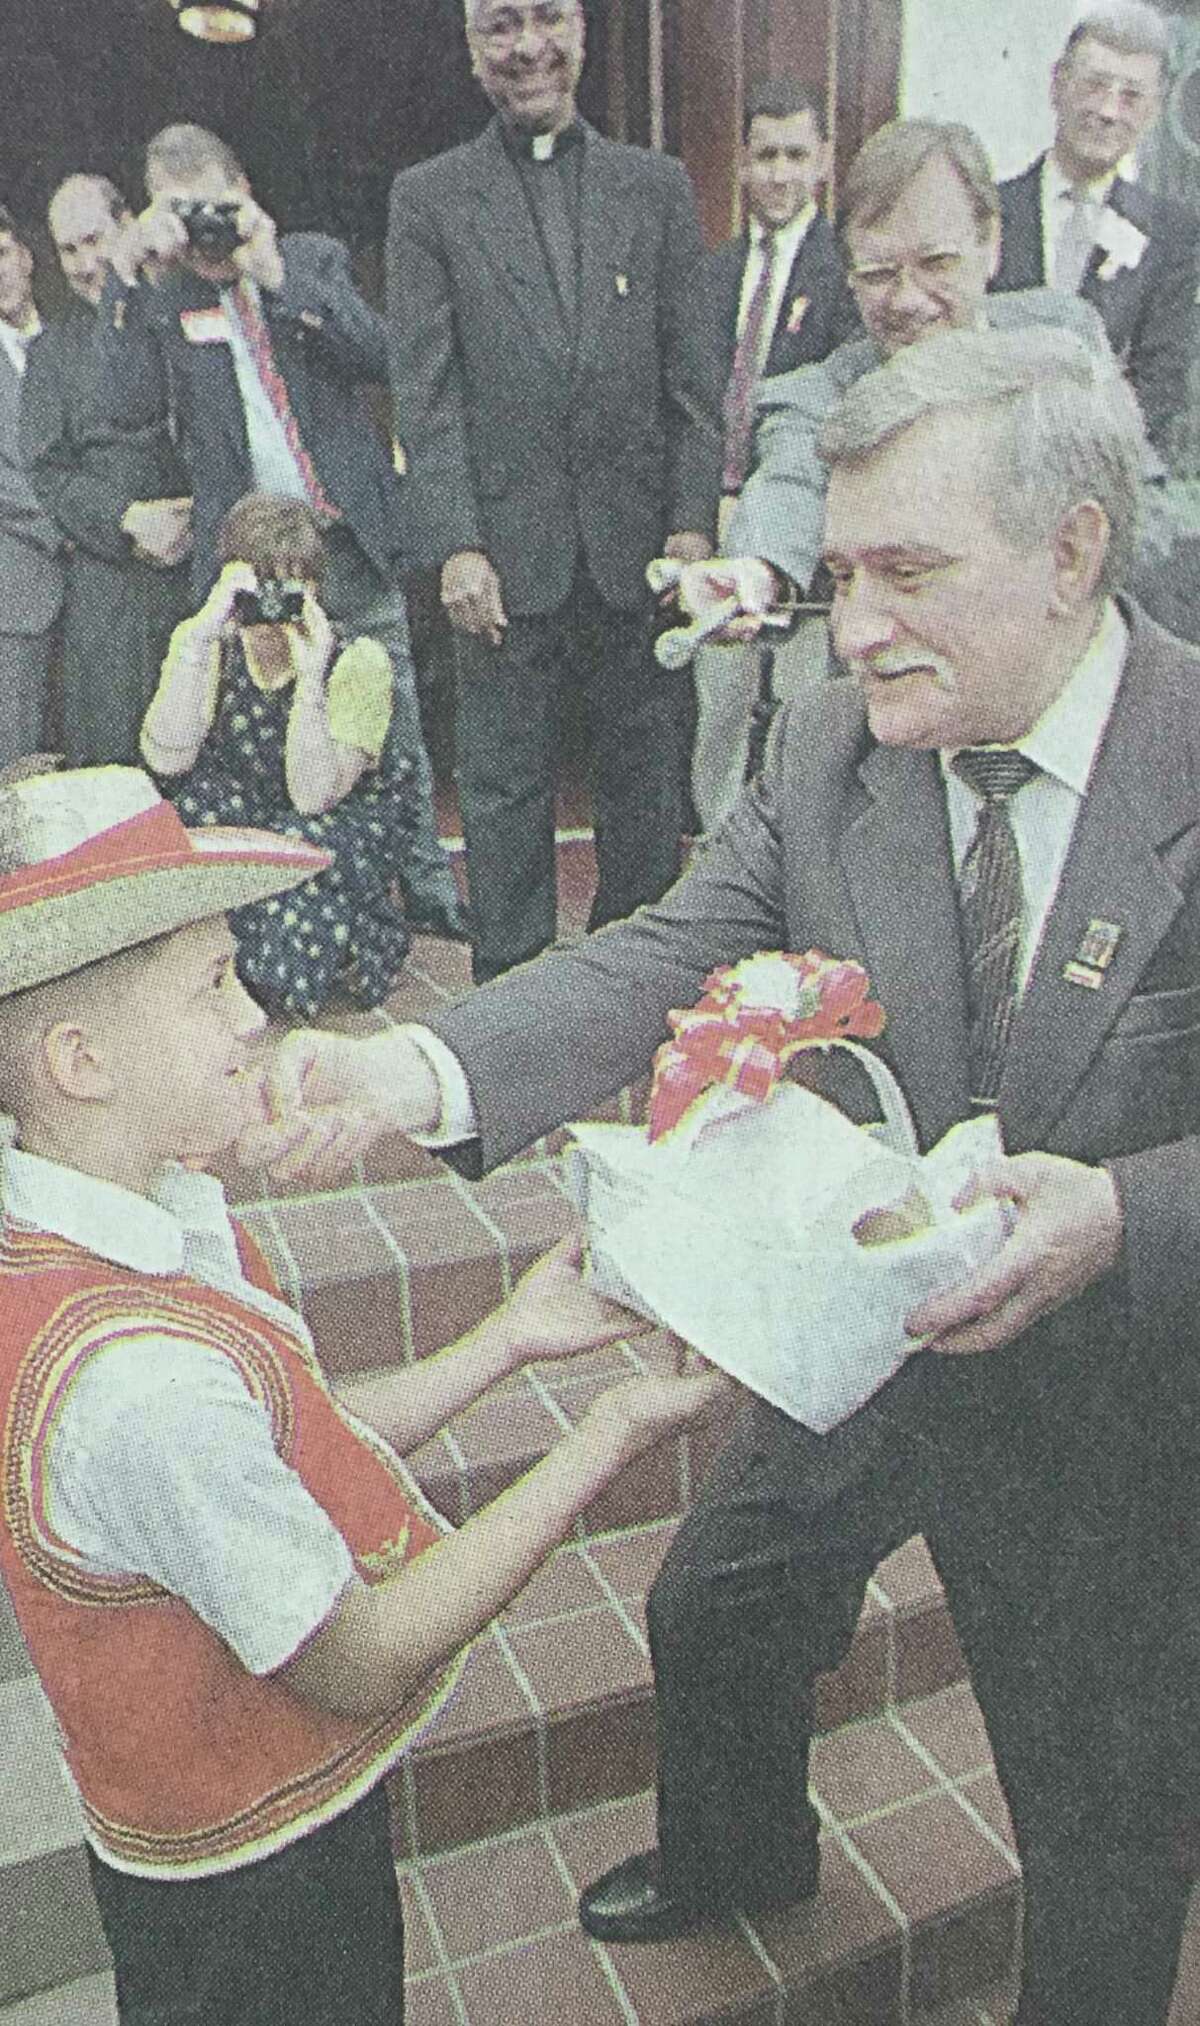 Lech Walesa, the former president of Poland, accepts a traditional Polish gift of bread and salt from Justin Halter, 10, outside of New Waverly's St. Joseph Catholic Church in October 1996.